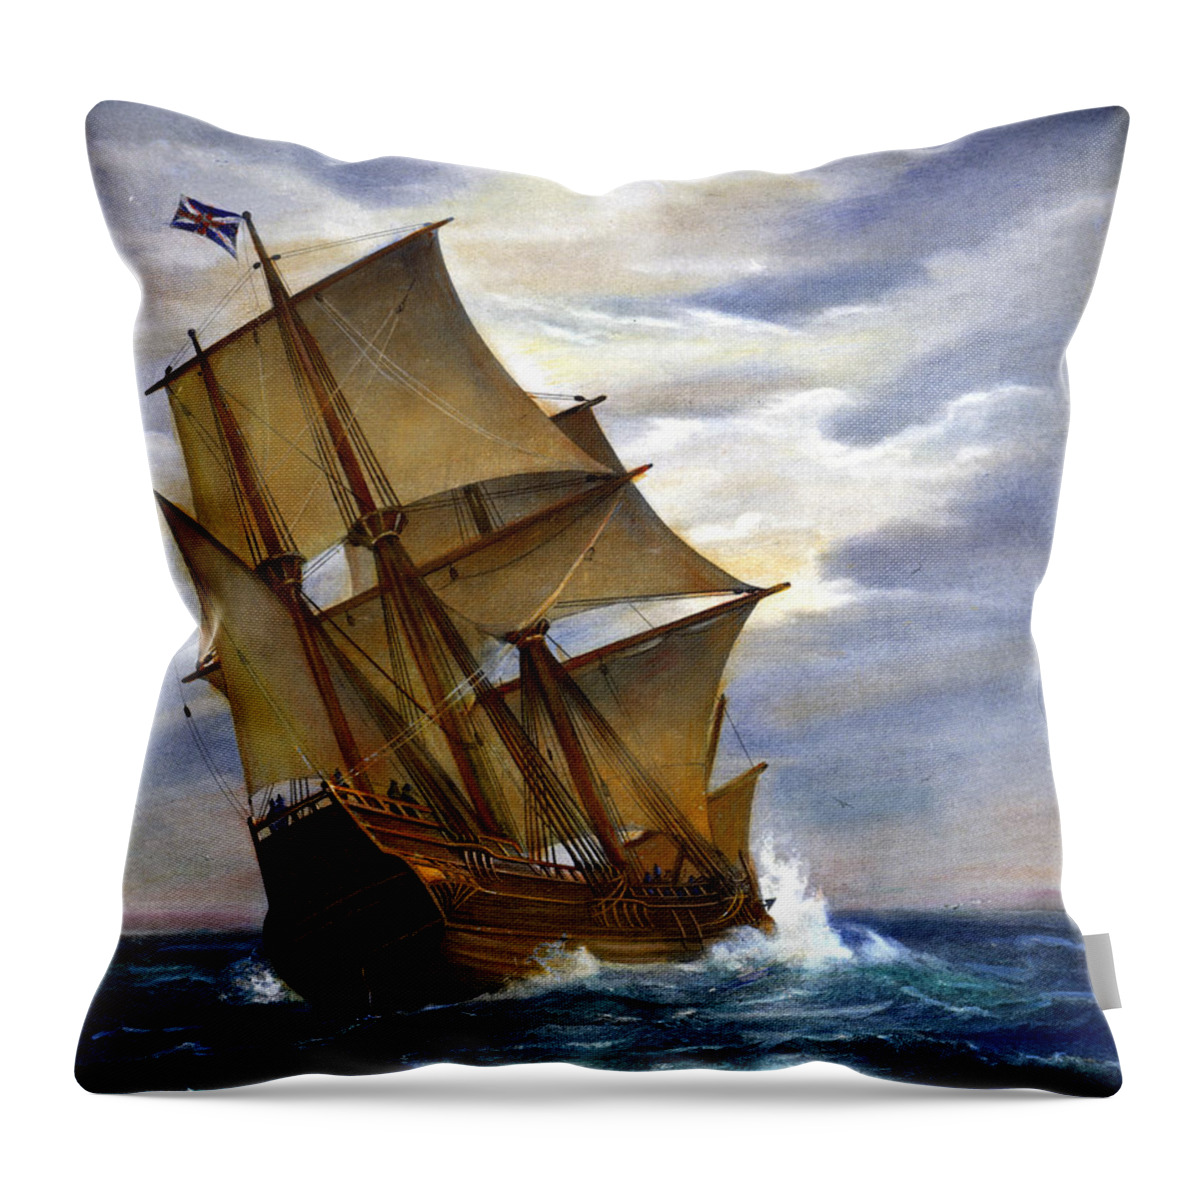 1620 Throw Pillow featuring the photograph The Mayflower #2 by Granger